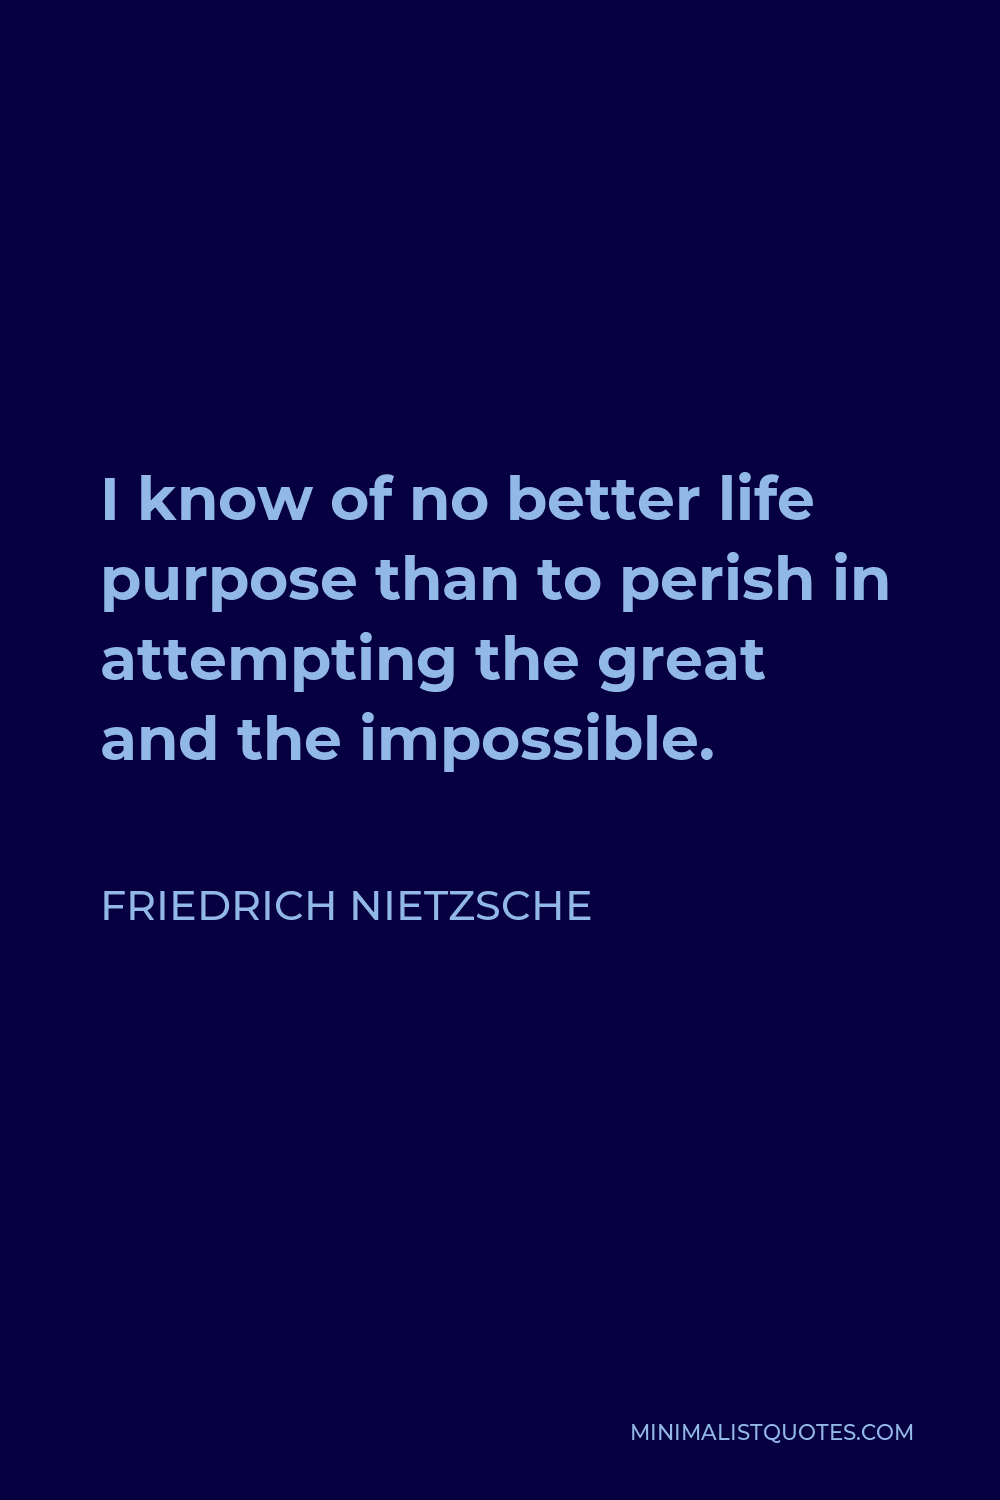 Friedrich Nietzsche Quote - I know of no better life purpose than to perish in attempting the great and the impossible.